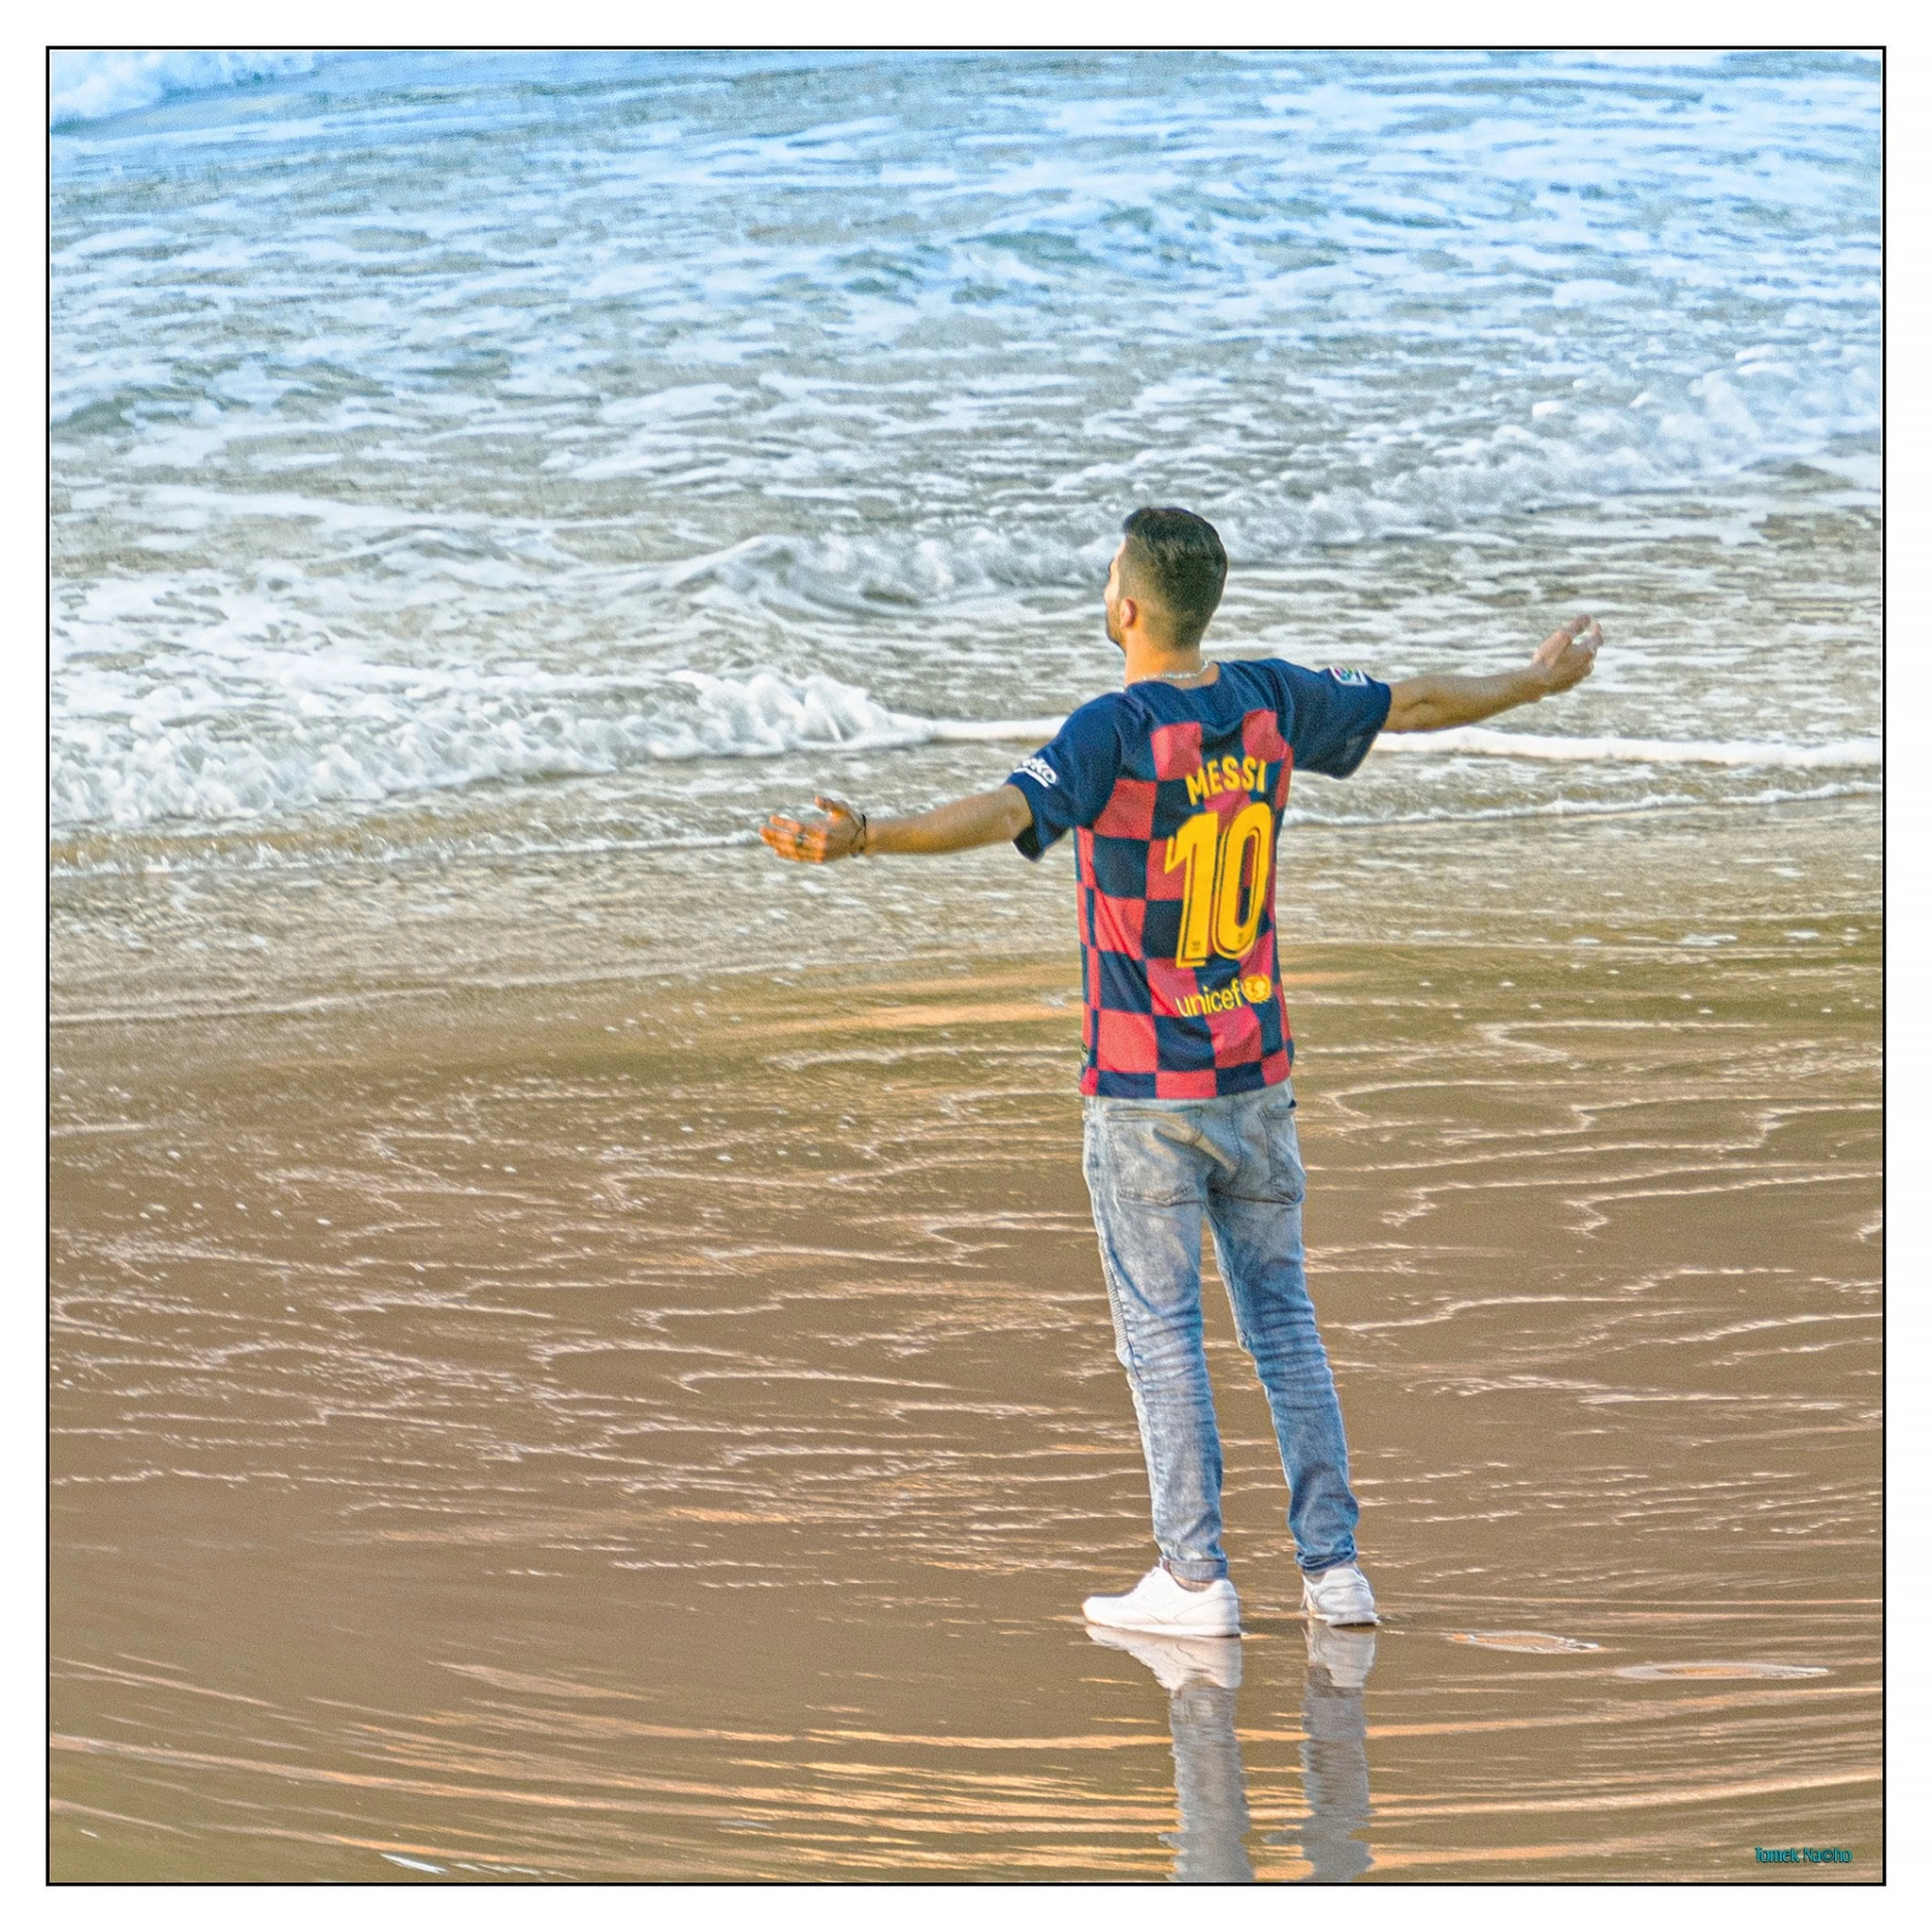 Messi and the ocean